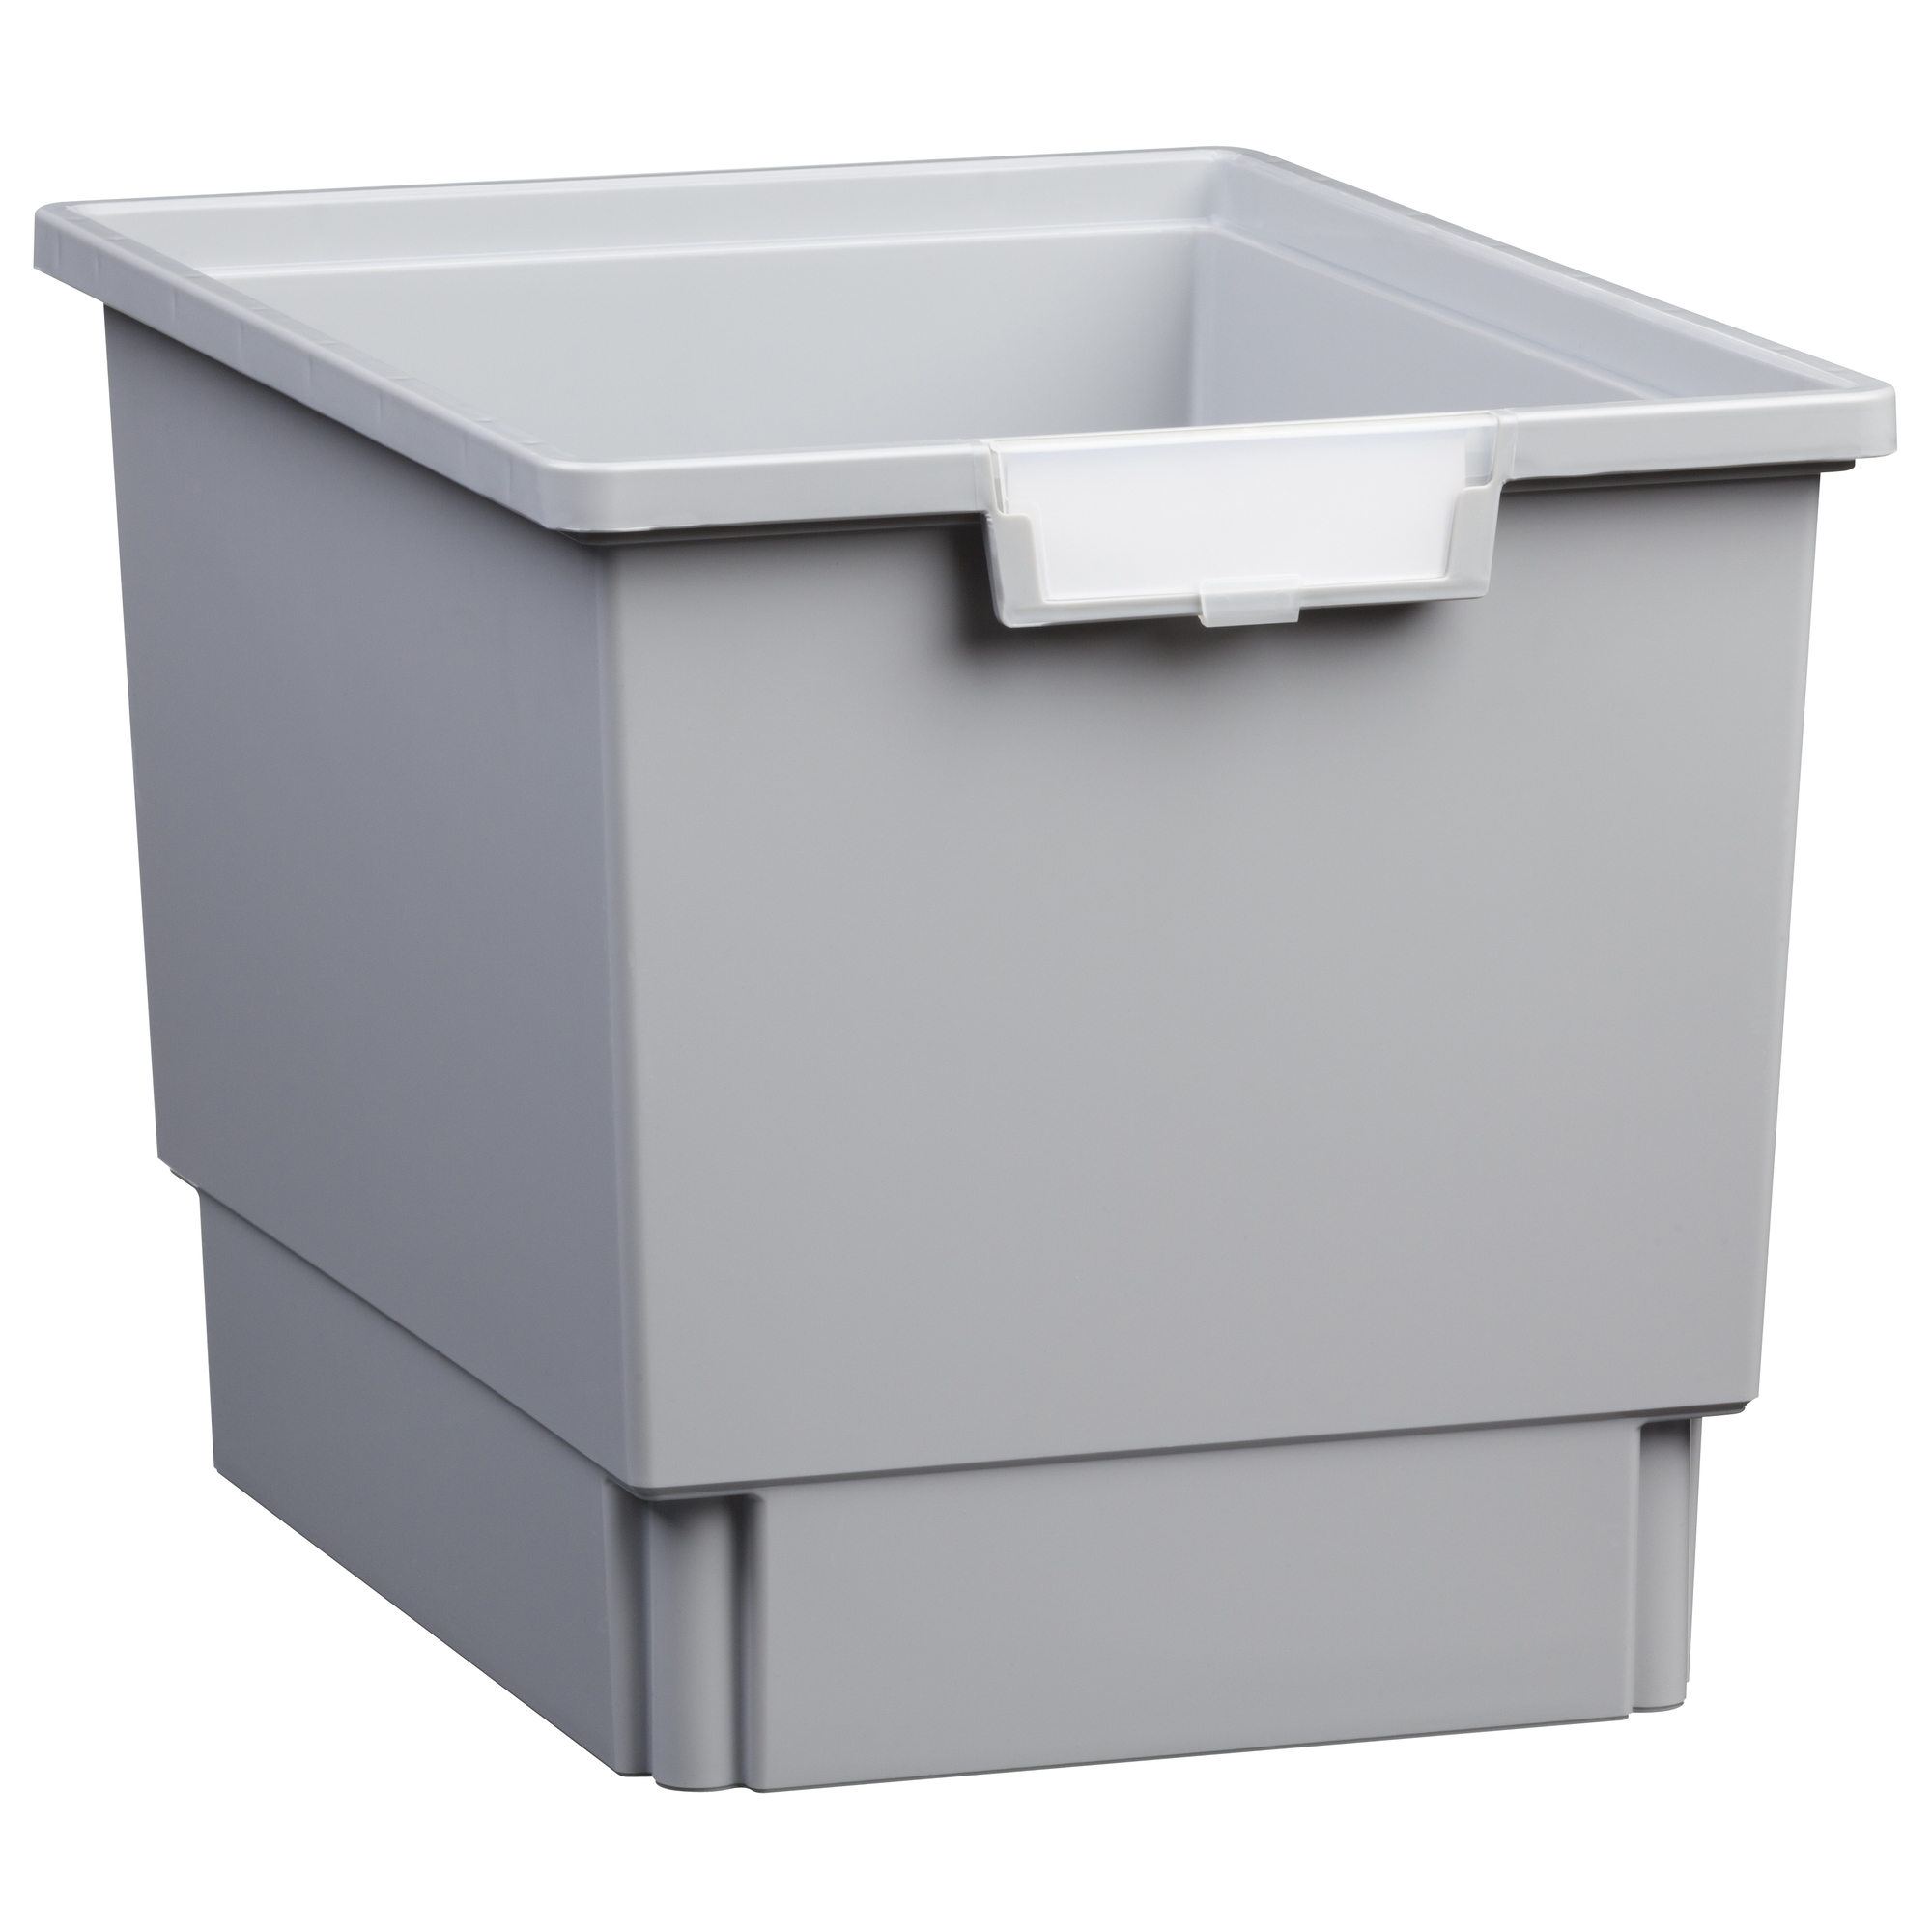 Certwood StorWerks, Slim Line 12Inch Tray in Light Gray-3PK, Included (qty.) 3 Height 12 in, Model CE1954LG3